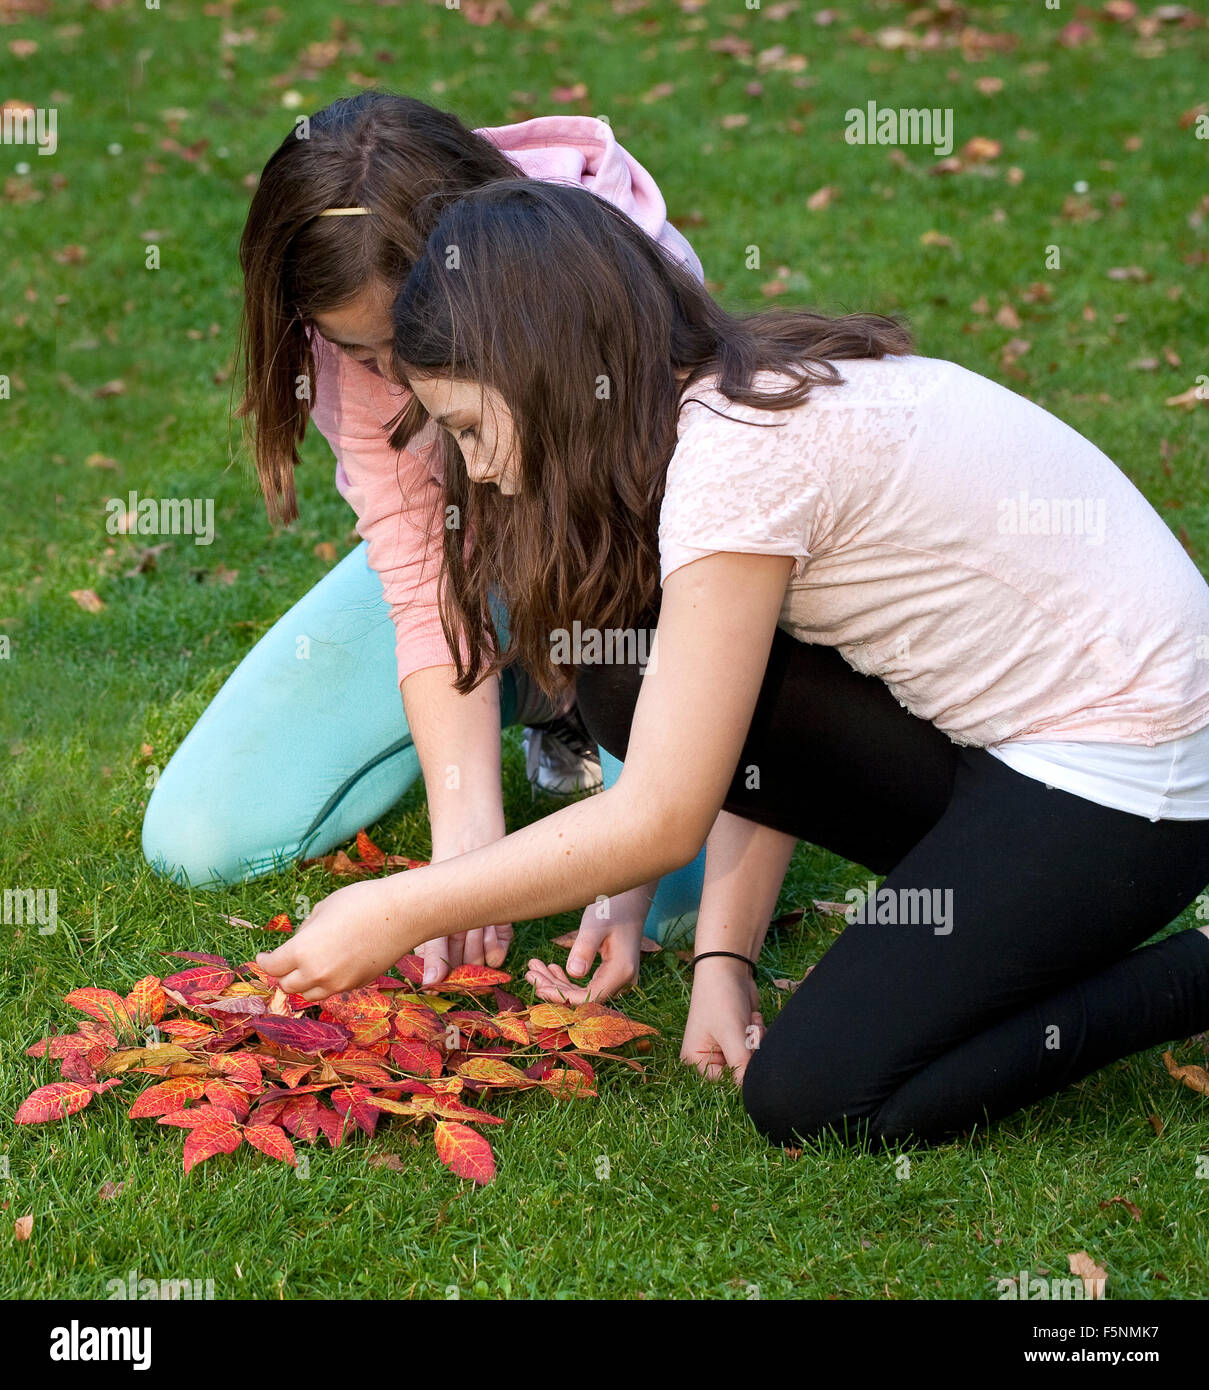 Two girls are busily creating a sun out of brilliant red autumn leaves. Stock Photo